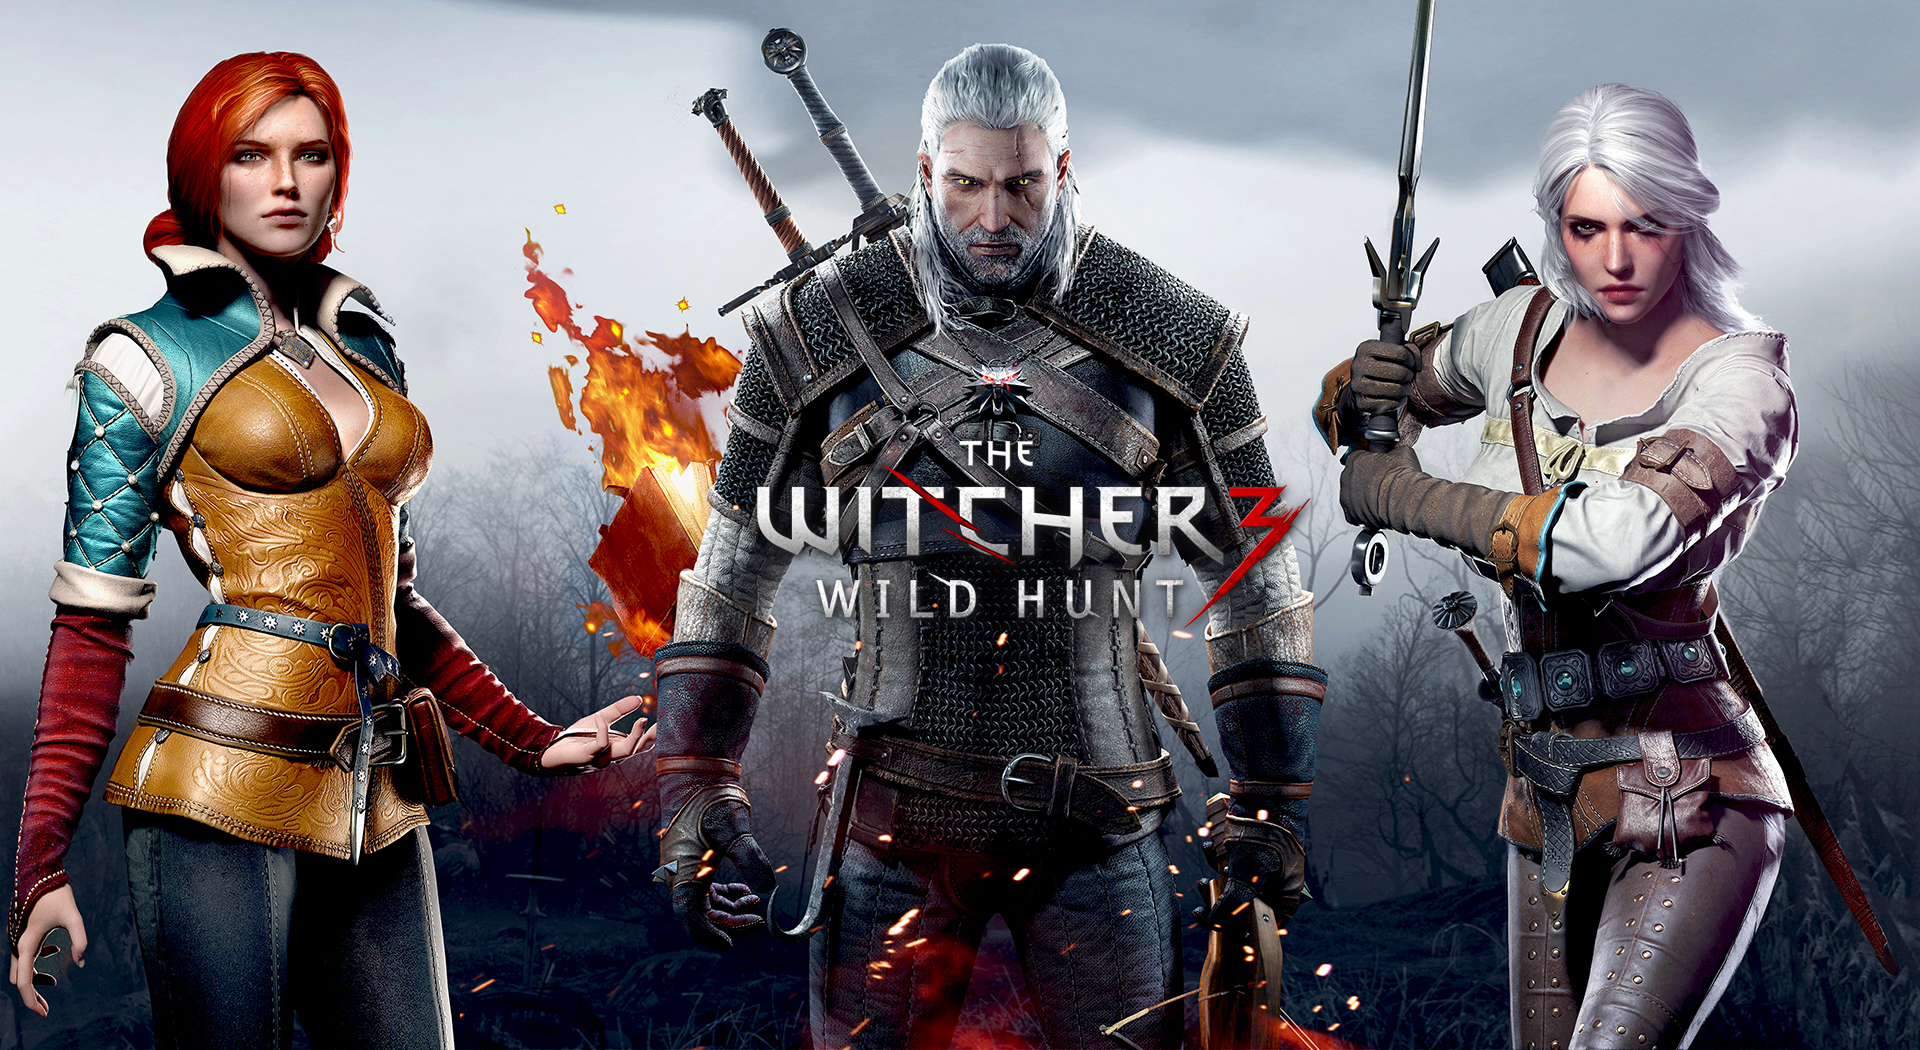 the witcher, video game, the witcher 3: wild hunt, ciri (the witcher), geralt of rivia, triss merigold